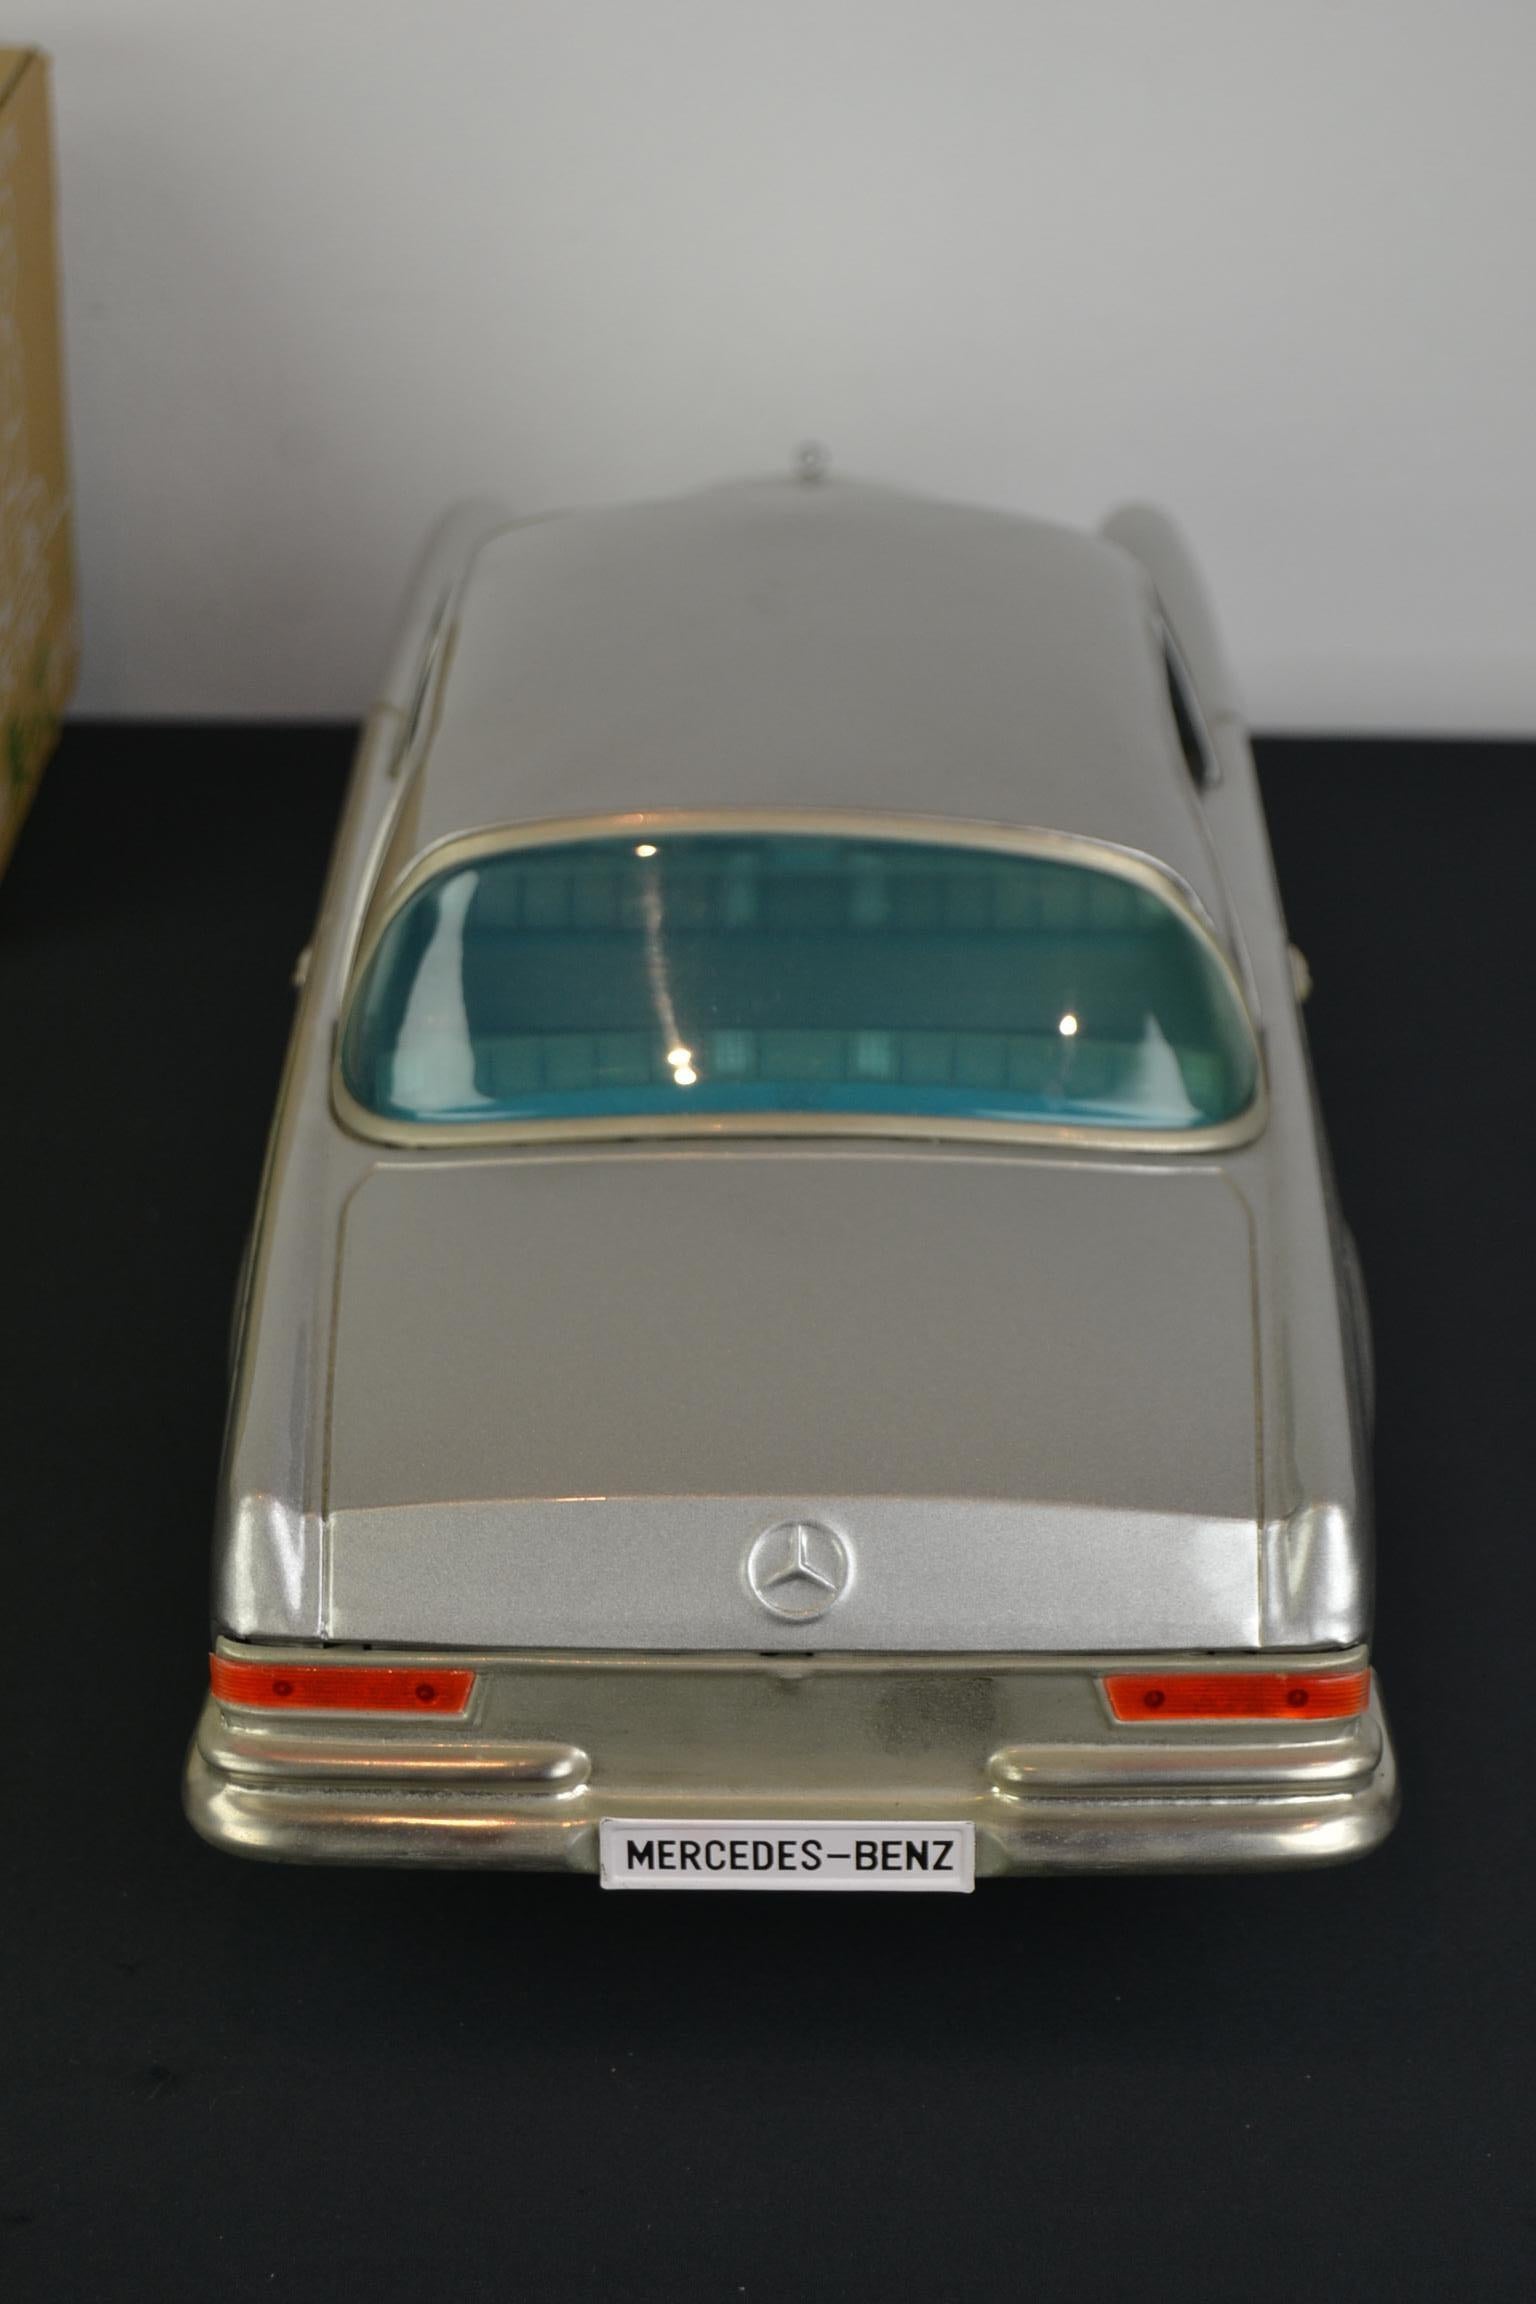 Boxed Mercedes Benz 300 SE Toy Model by Ichiko Japan, 1980s 8